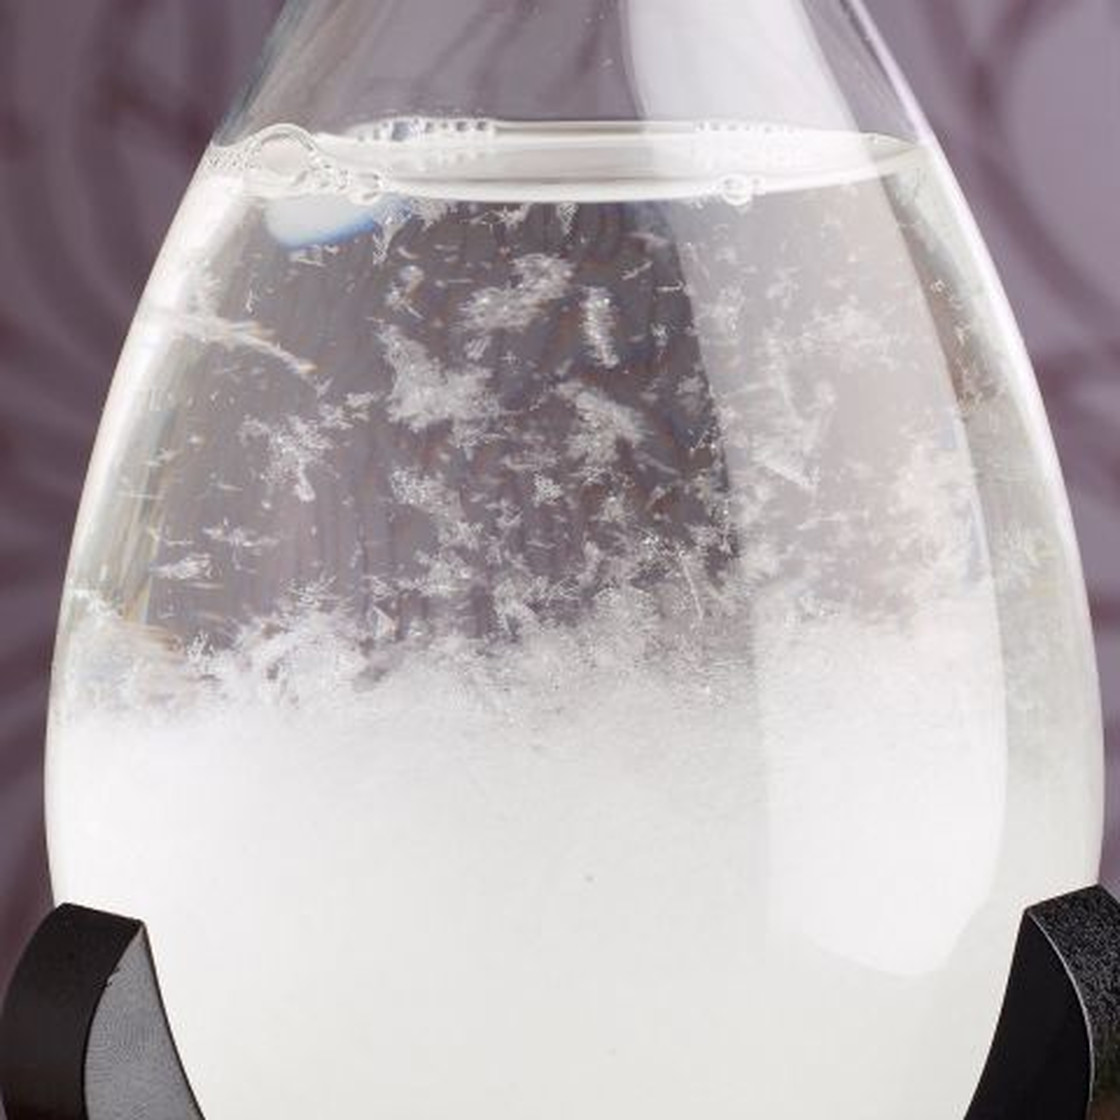 The Fitzroy storm glass